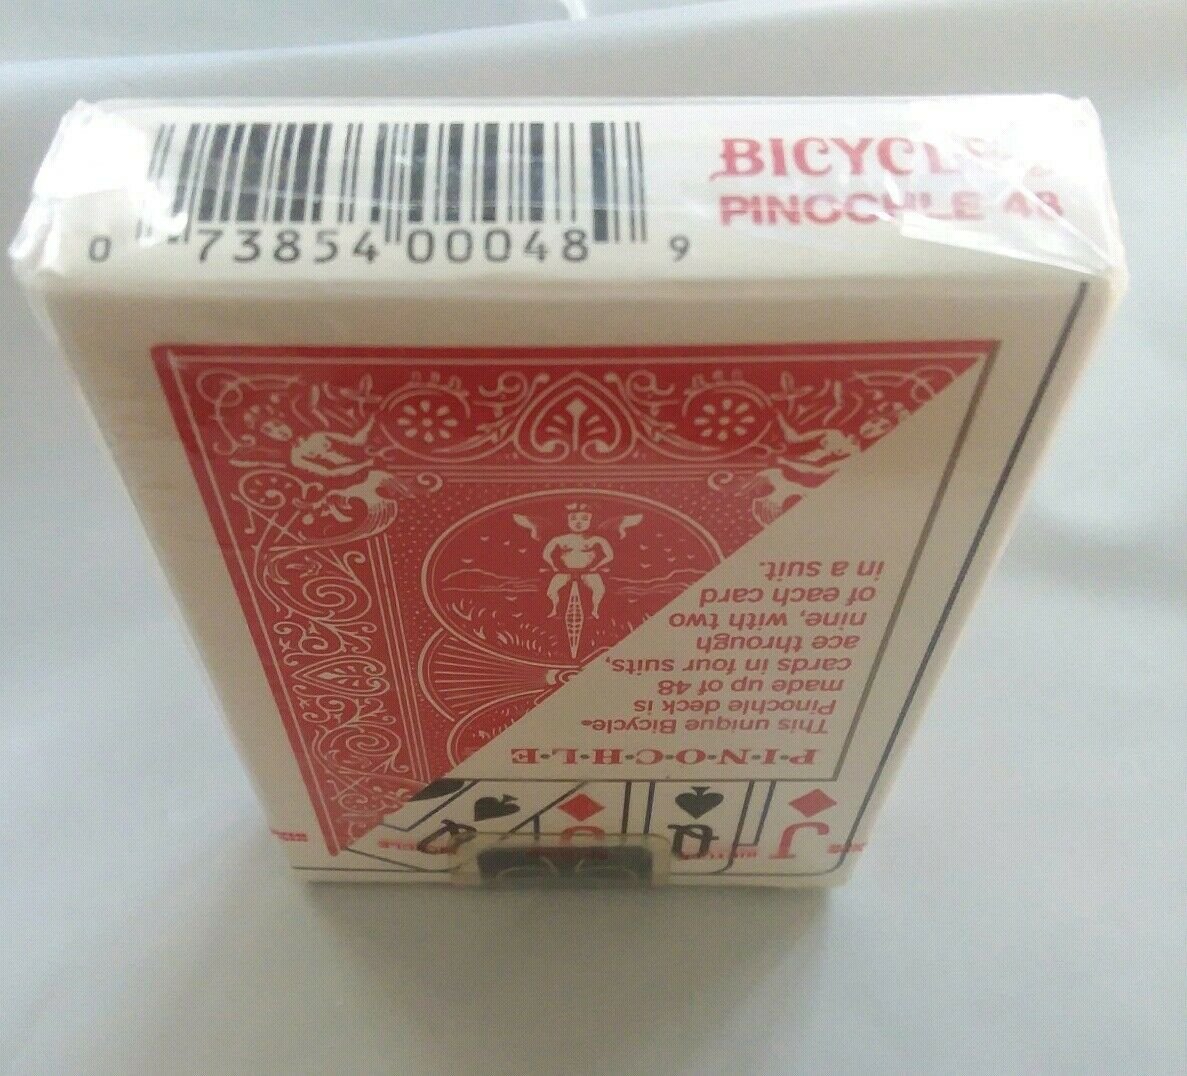 bicycle pinochle special 48 card deck playing cards